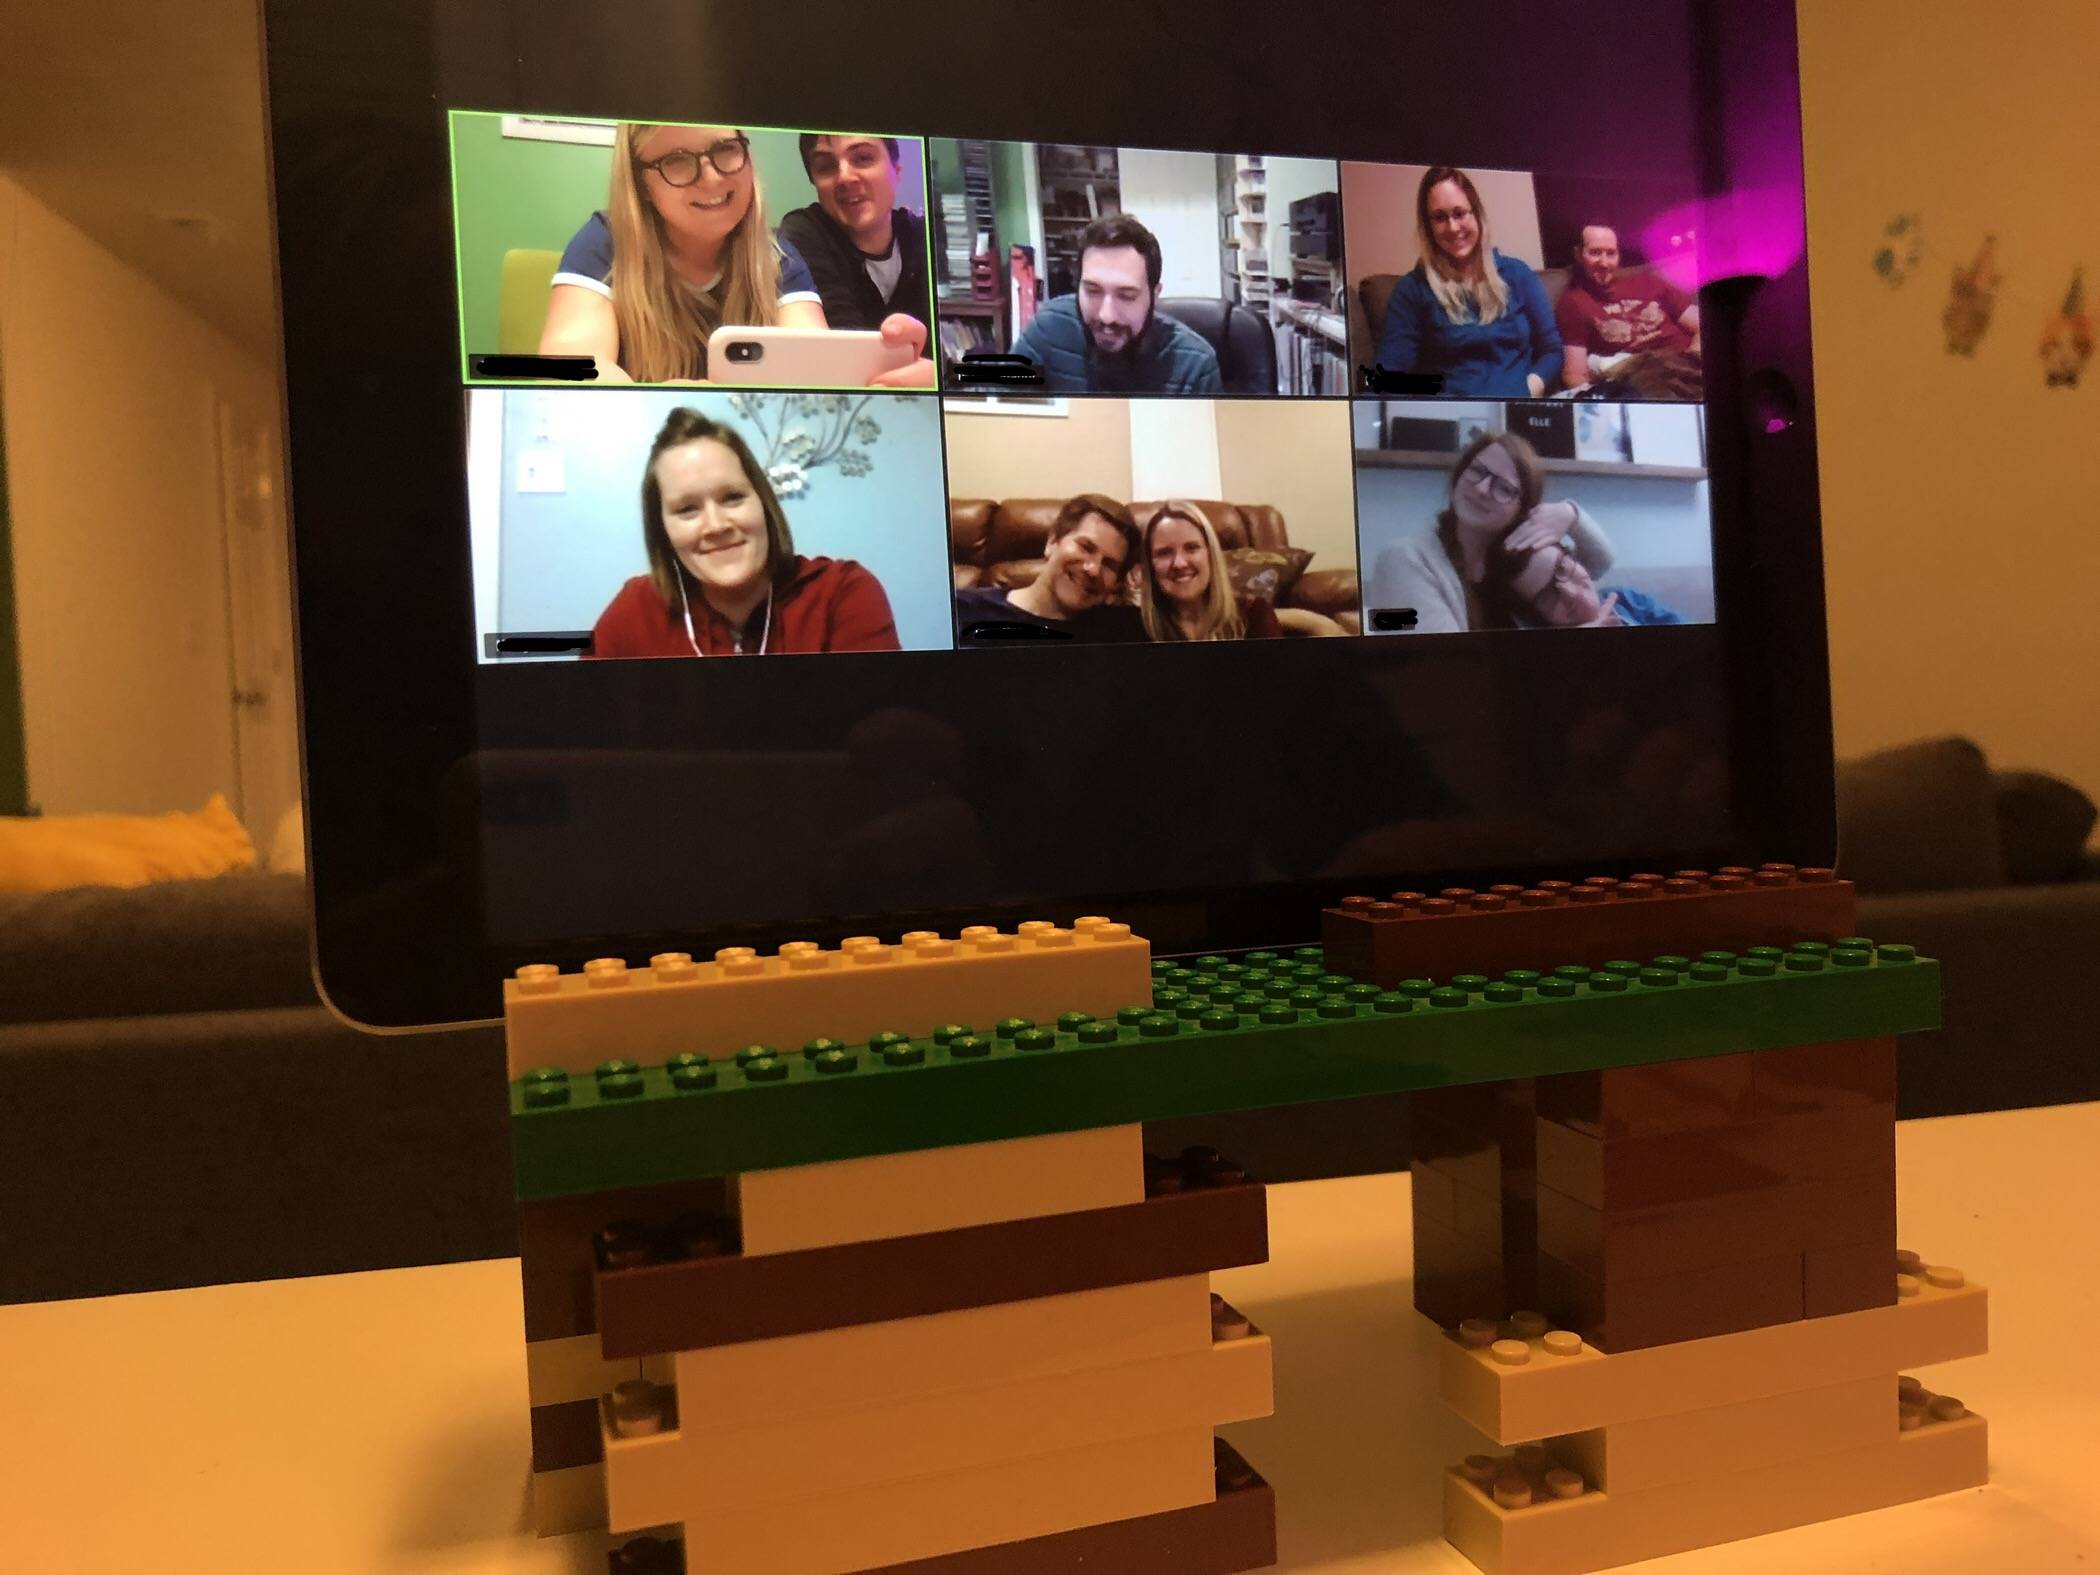 An iPad on a stand made from LEGO bricks shows 6 squares of people. The top left corner pictures the author and her husband. Photo by Alyssa Buckley.